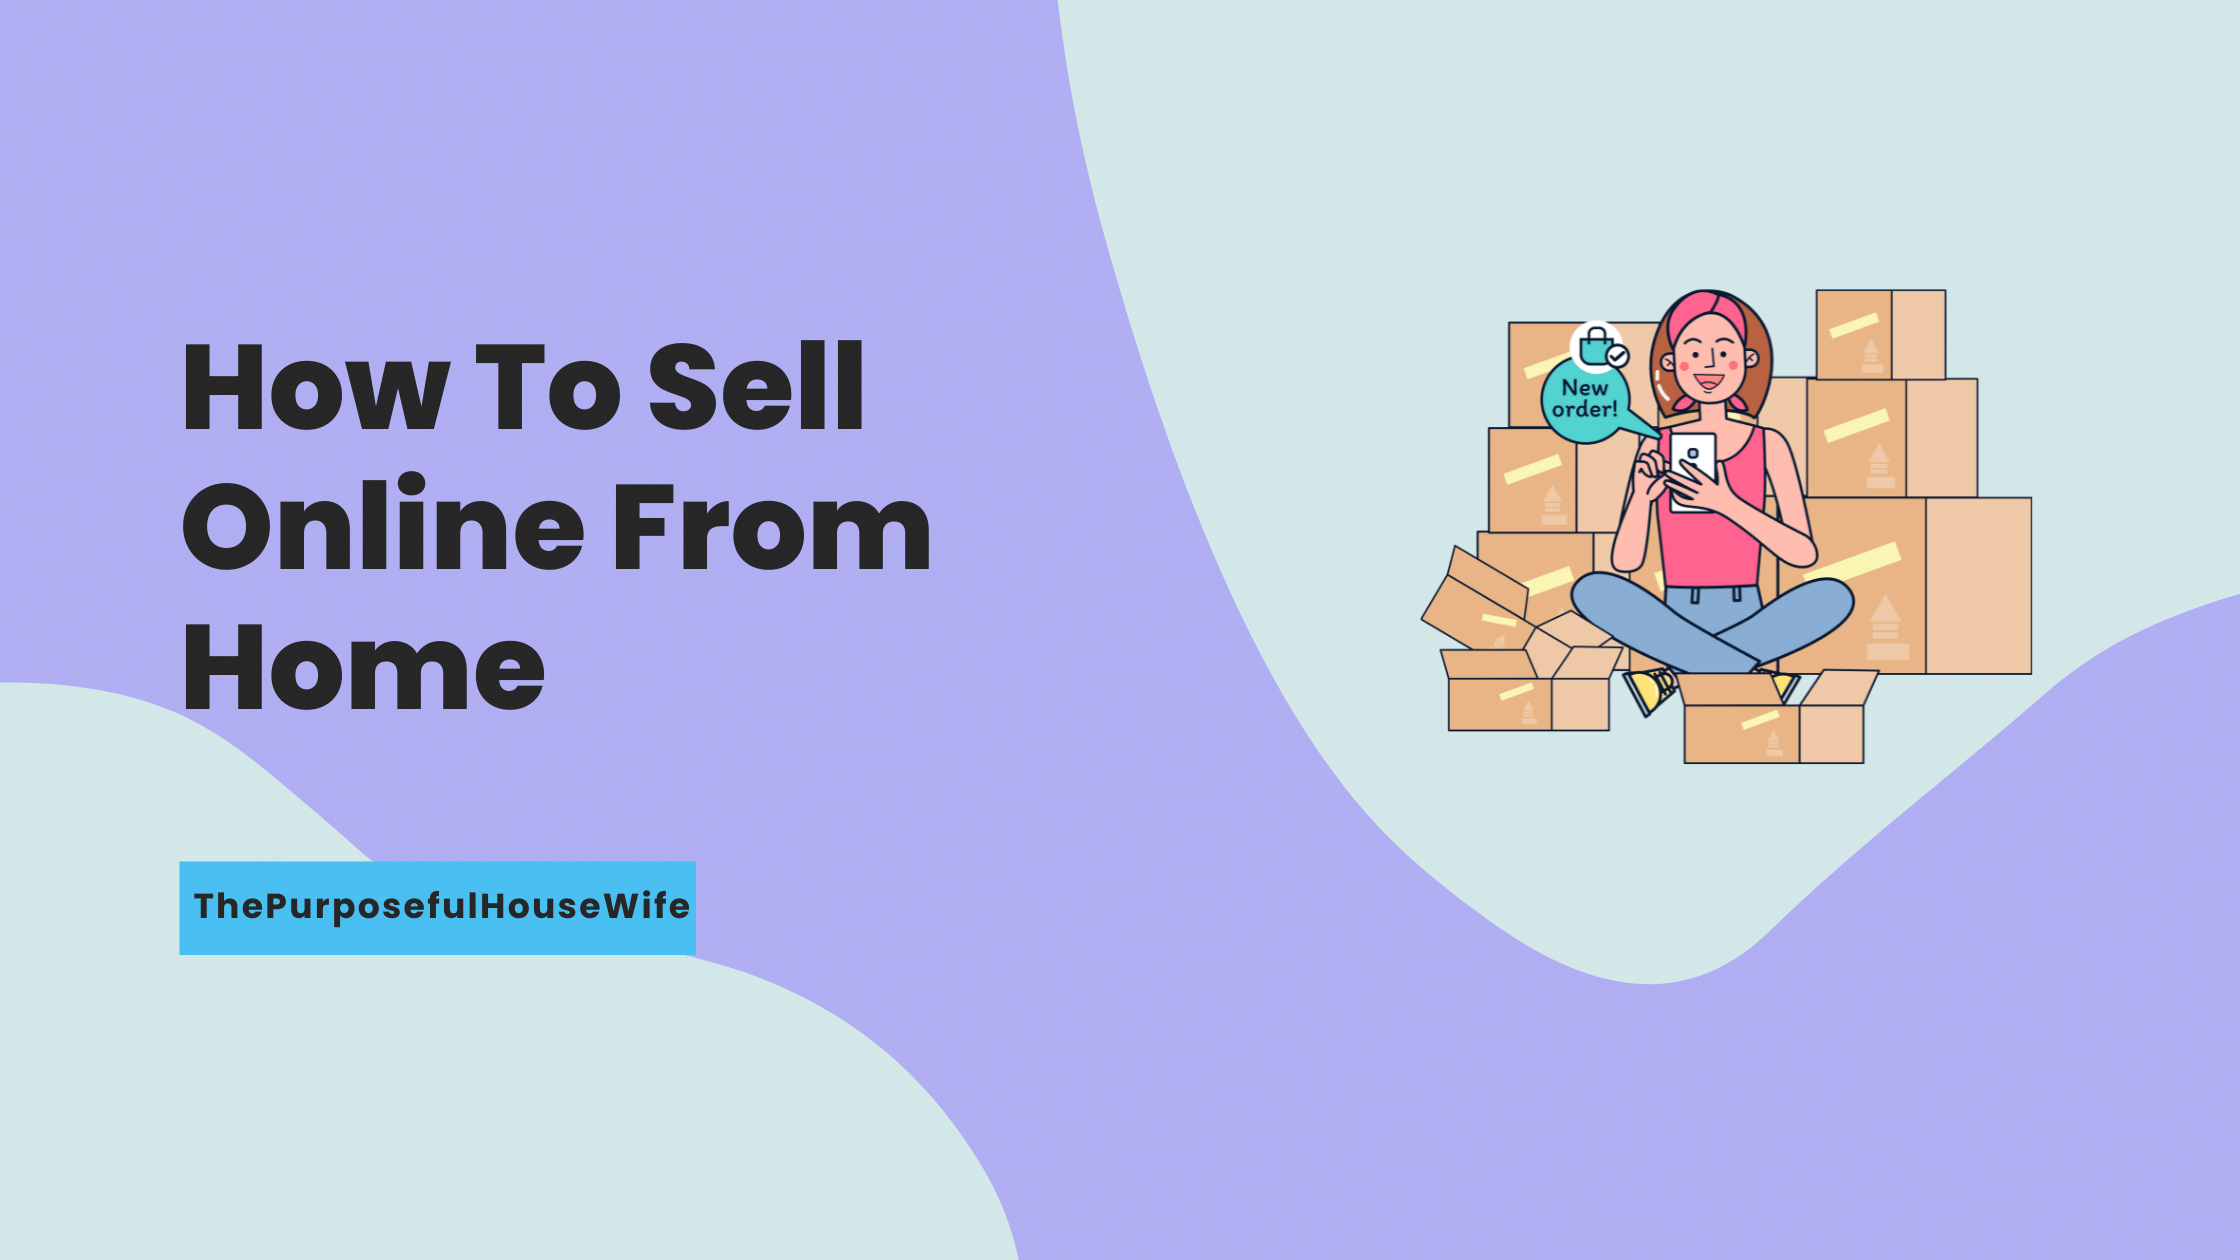 How To Sell Online From Home - ThePurposefulHouseWife